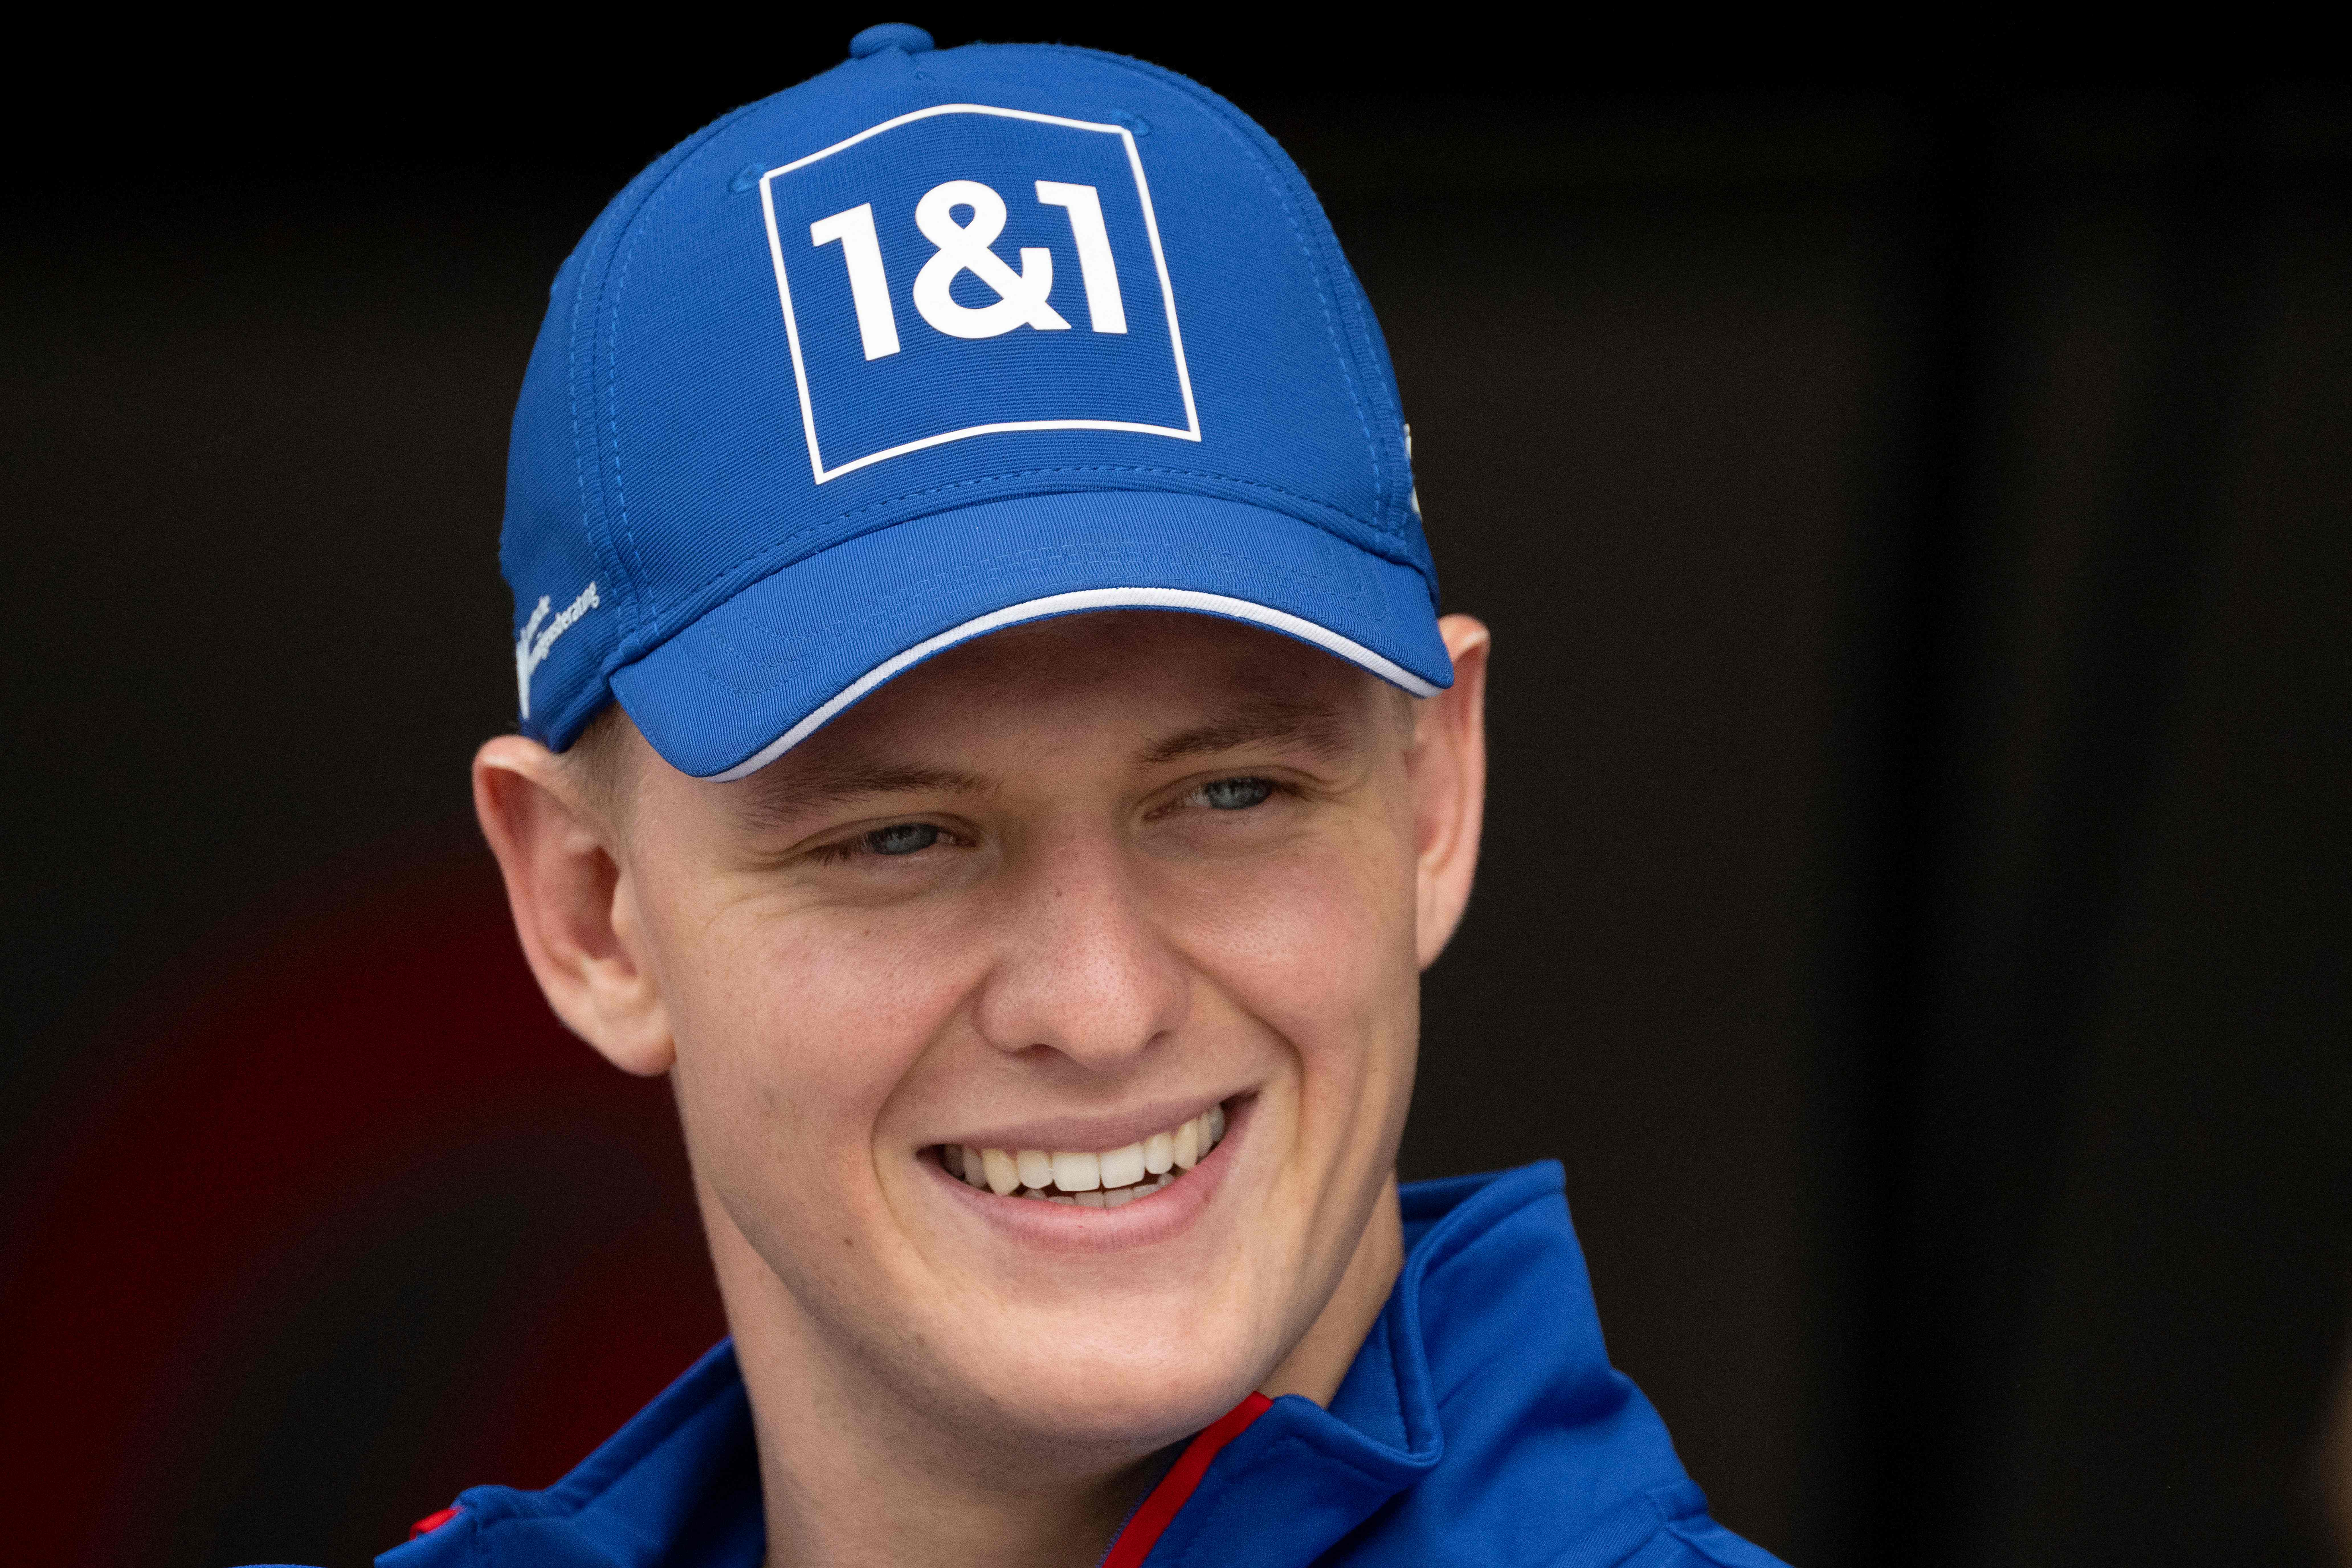 Mick Schumacher scored his first F1 points at the British Grand Prix in July